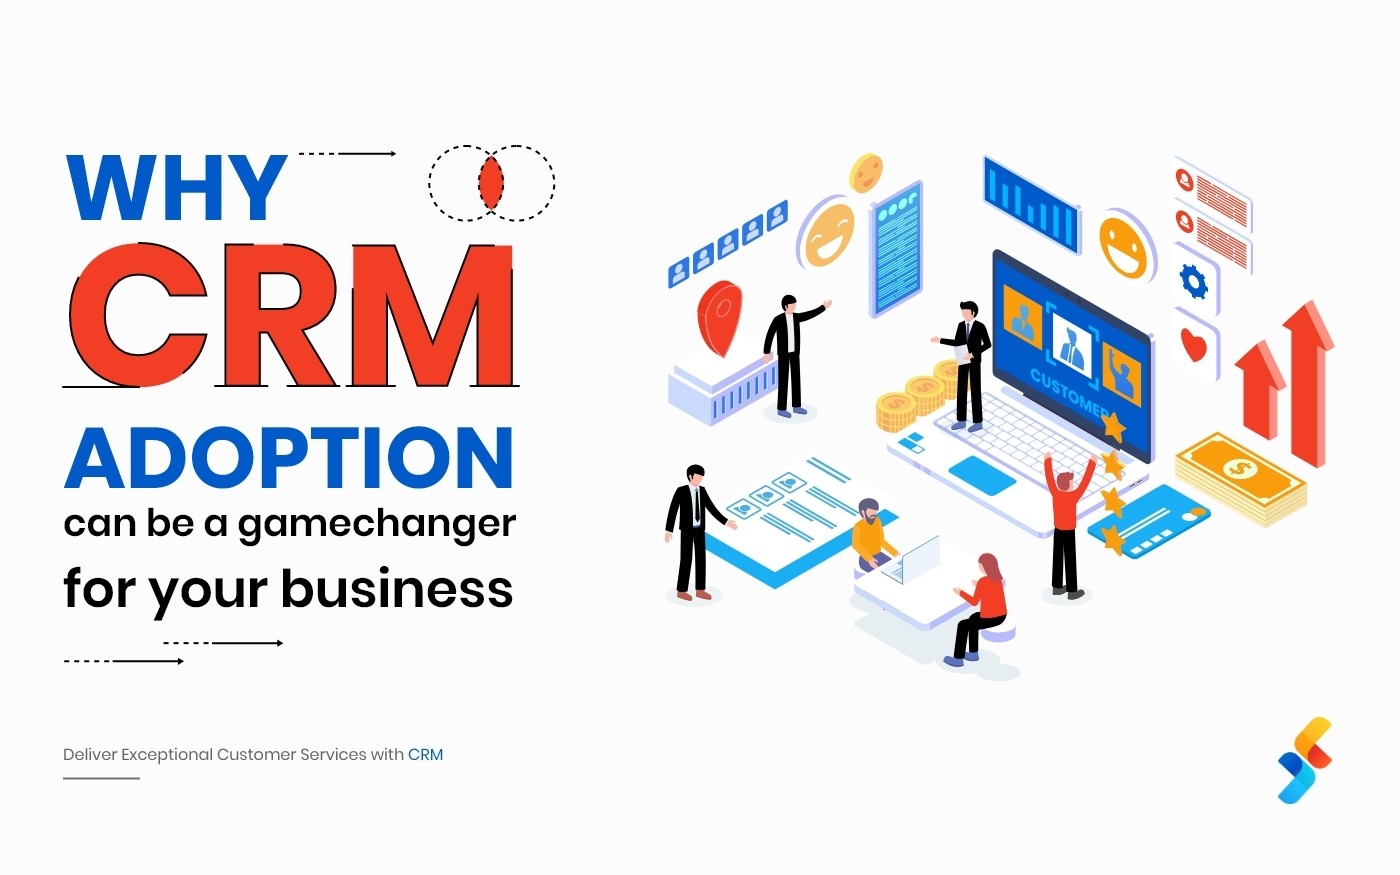 Why CRM Adoption Can Be a Gamechanger for Your Business?